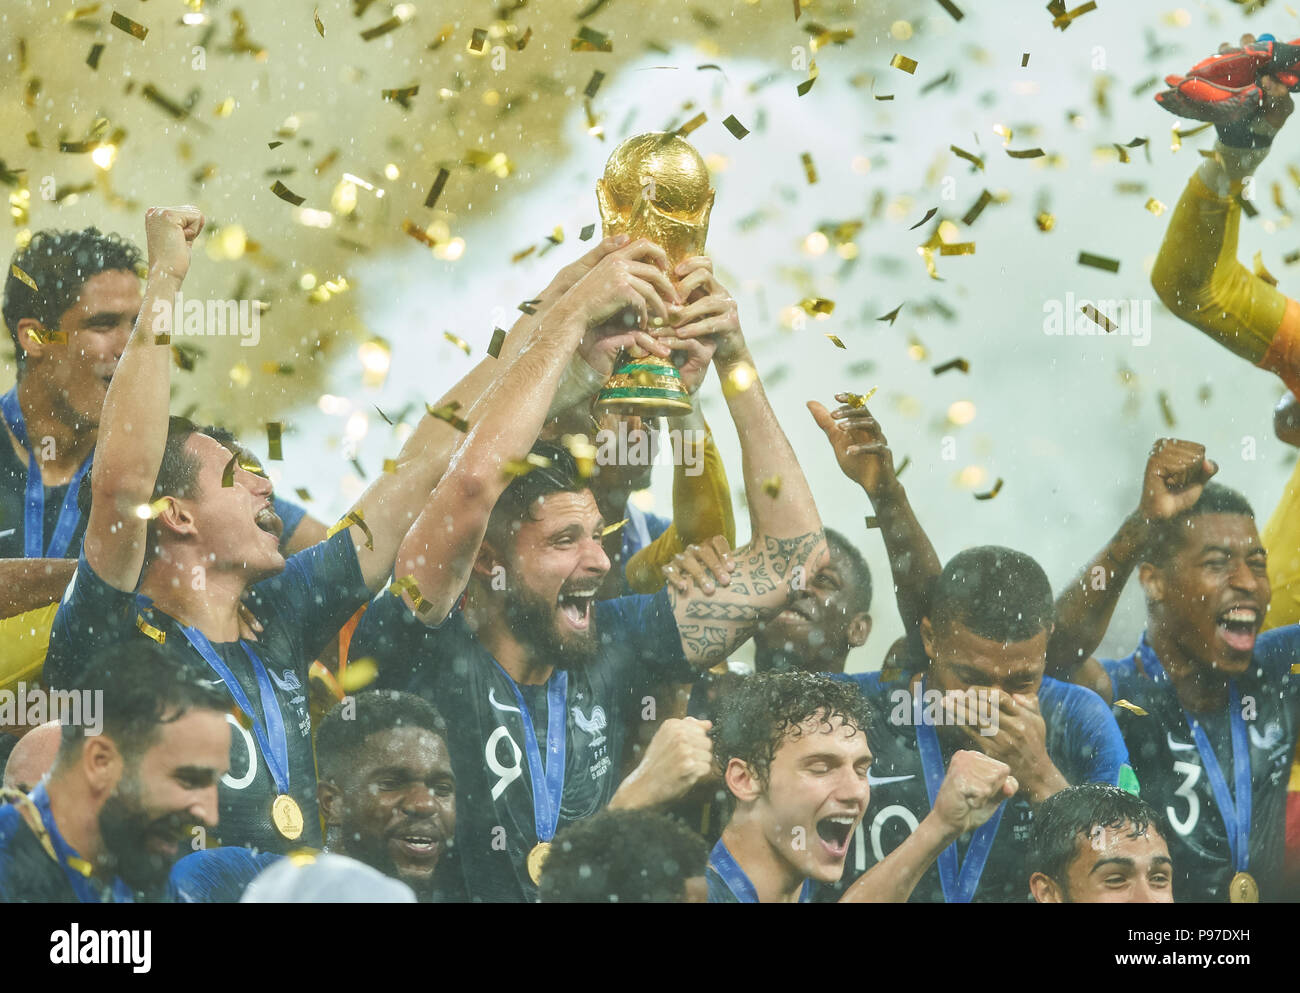 Moscow, Russia. 15th July 2018. Moscow, Russia. 15th July 2018.  Hugo LLORIS, Fra 1 goalkeeper, Kylian MBAPPE, FRA 10 Olivier GIROUD, FRA 9  Antoine GRIEZMANN, FRA 7 with the Official FIFA World Cup Original Trophy, winner, victory, ceremony,  FRANCE  - CROATIA 4-1 Football FIFA WORLD CUP 2018 RUSSIA, Final, Season 2018/2019,  July 15, 2018 in Luzhniki Stadium Moscow, Russia. © Peter Schatz / Alamy Live News Stock Photo